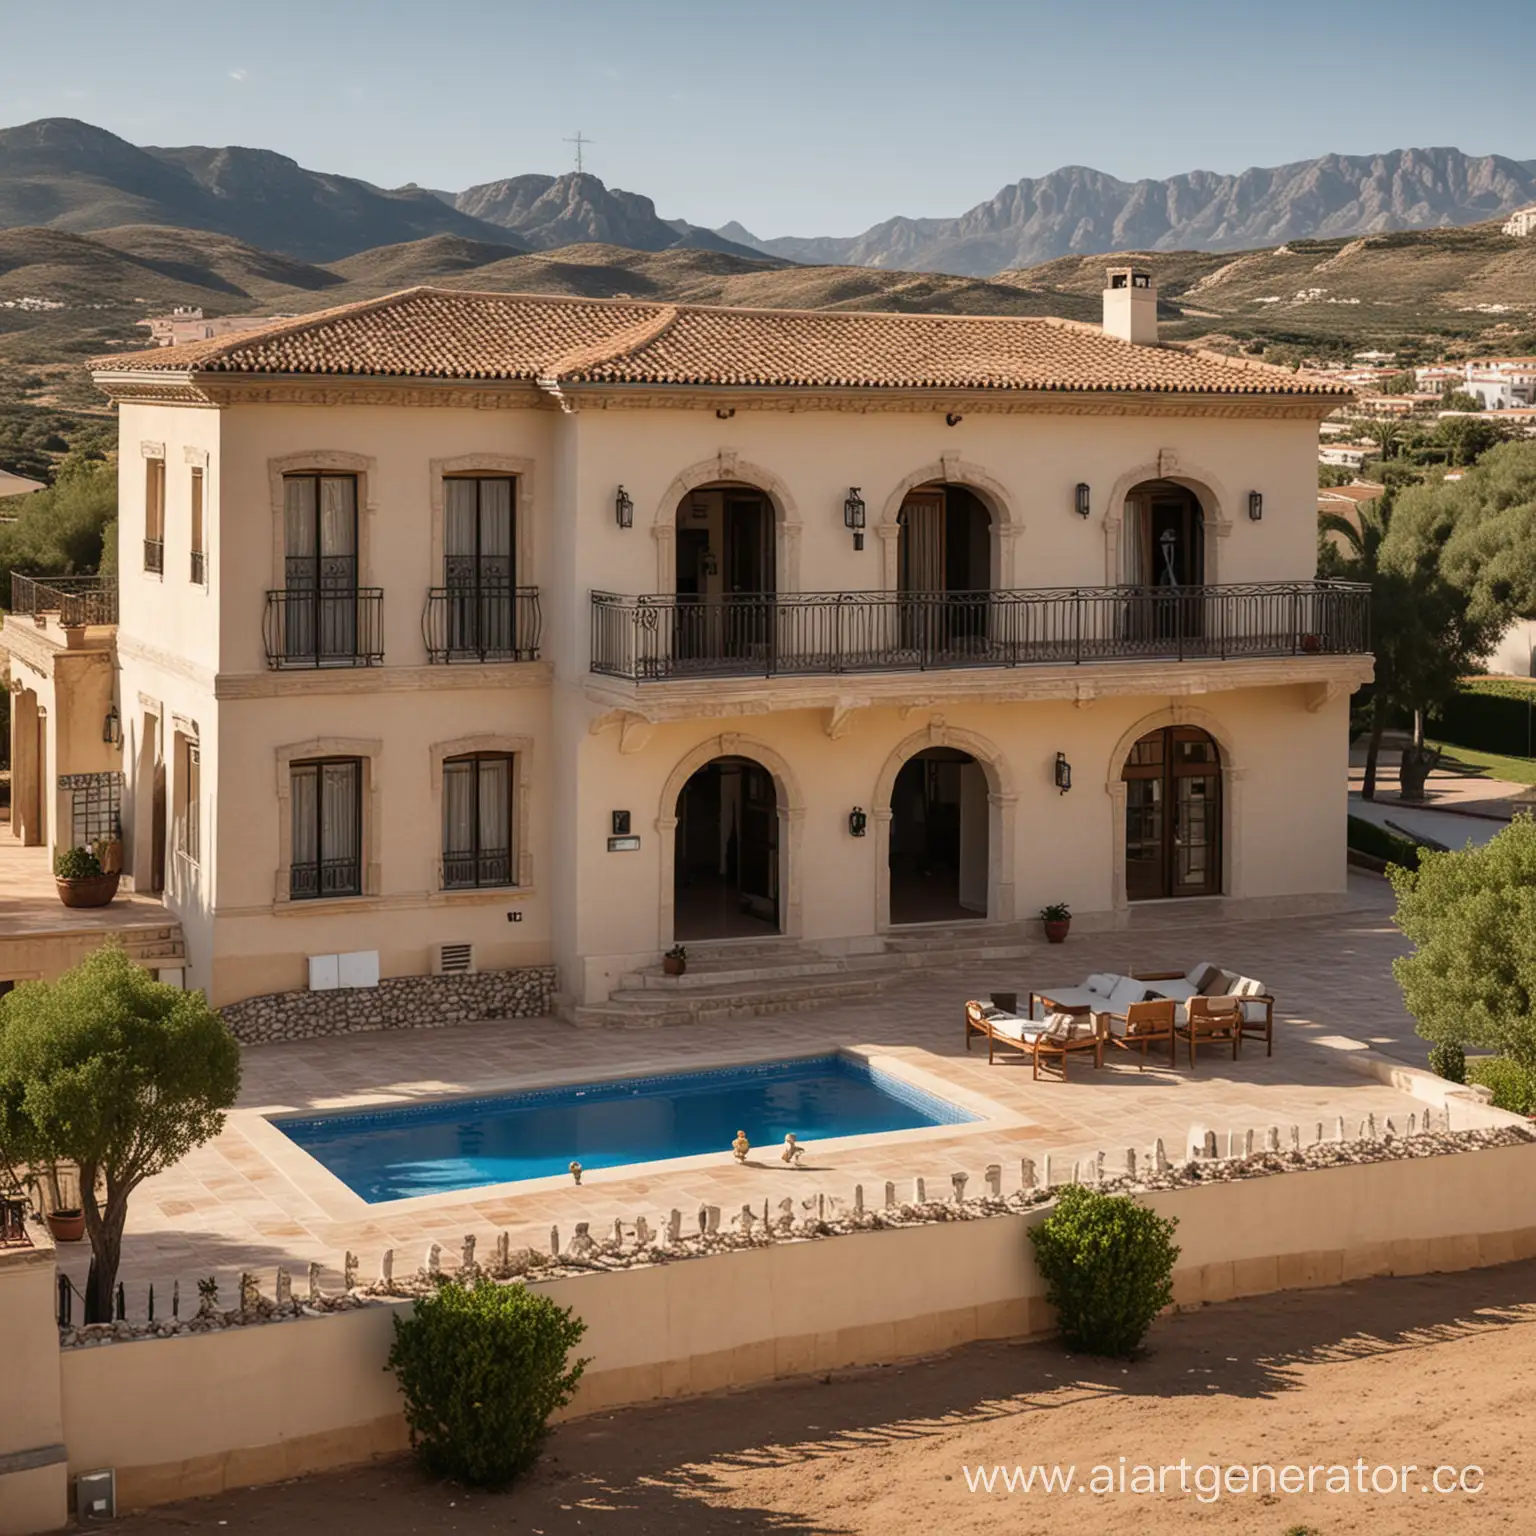 Picturesque-Large-Spanish-House-Surrounded-by-Lush-Gardens